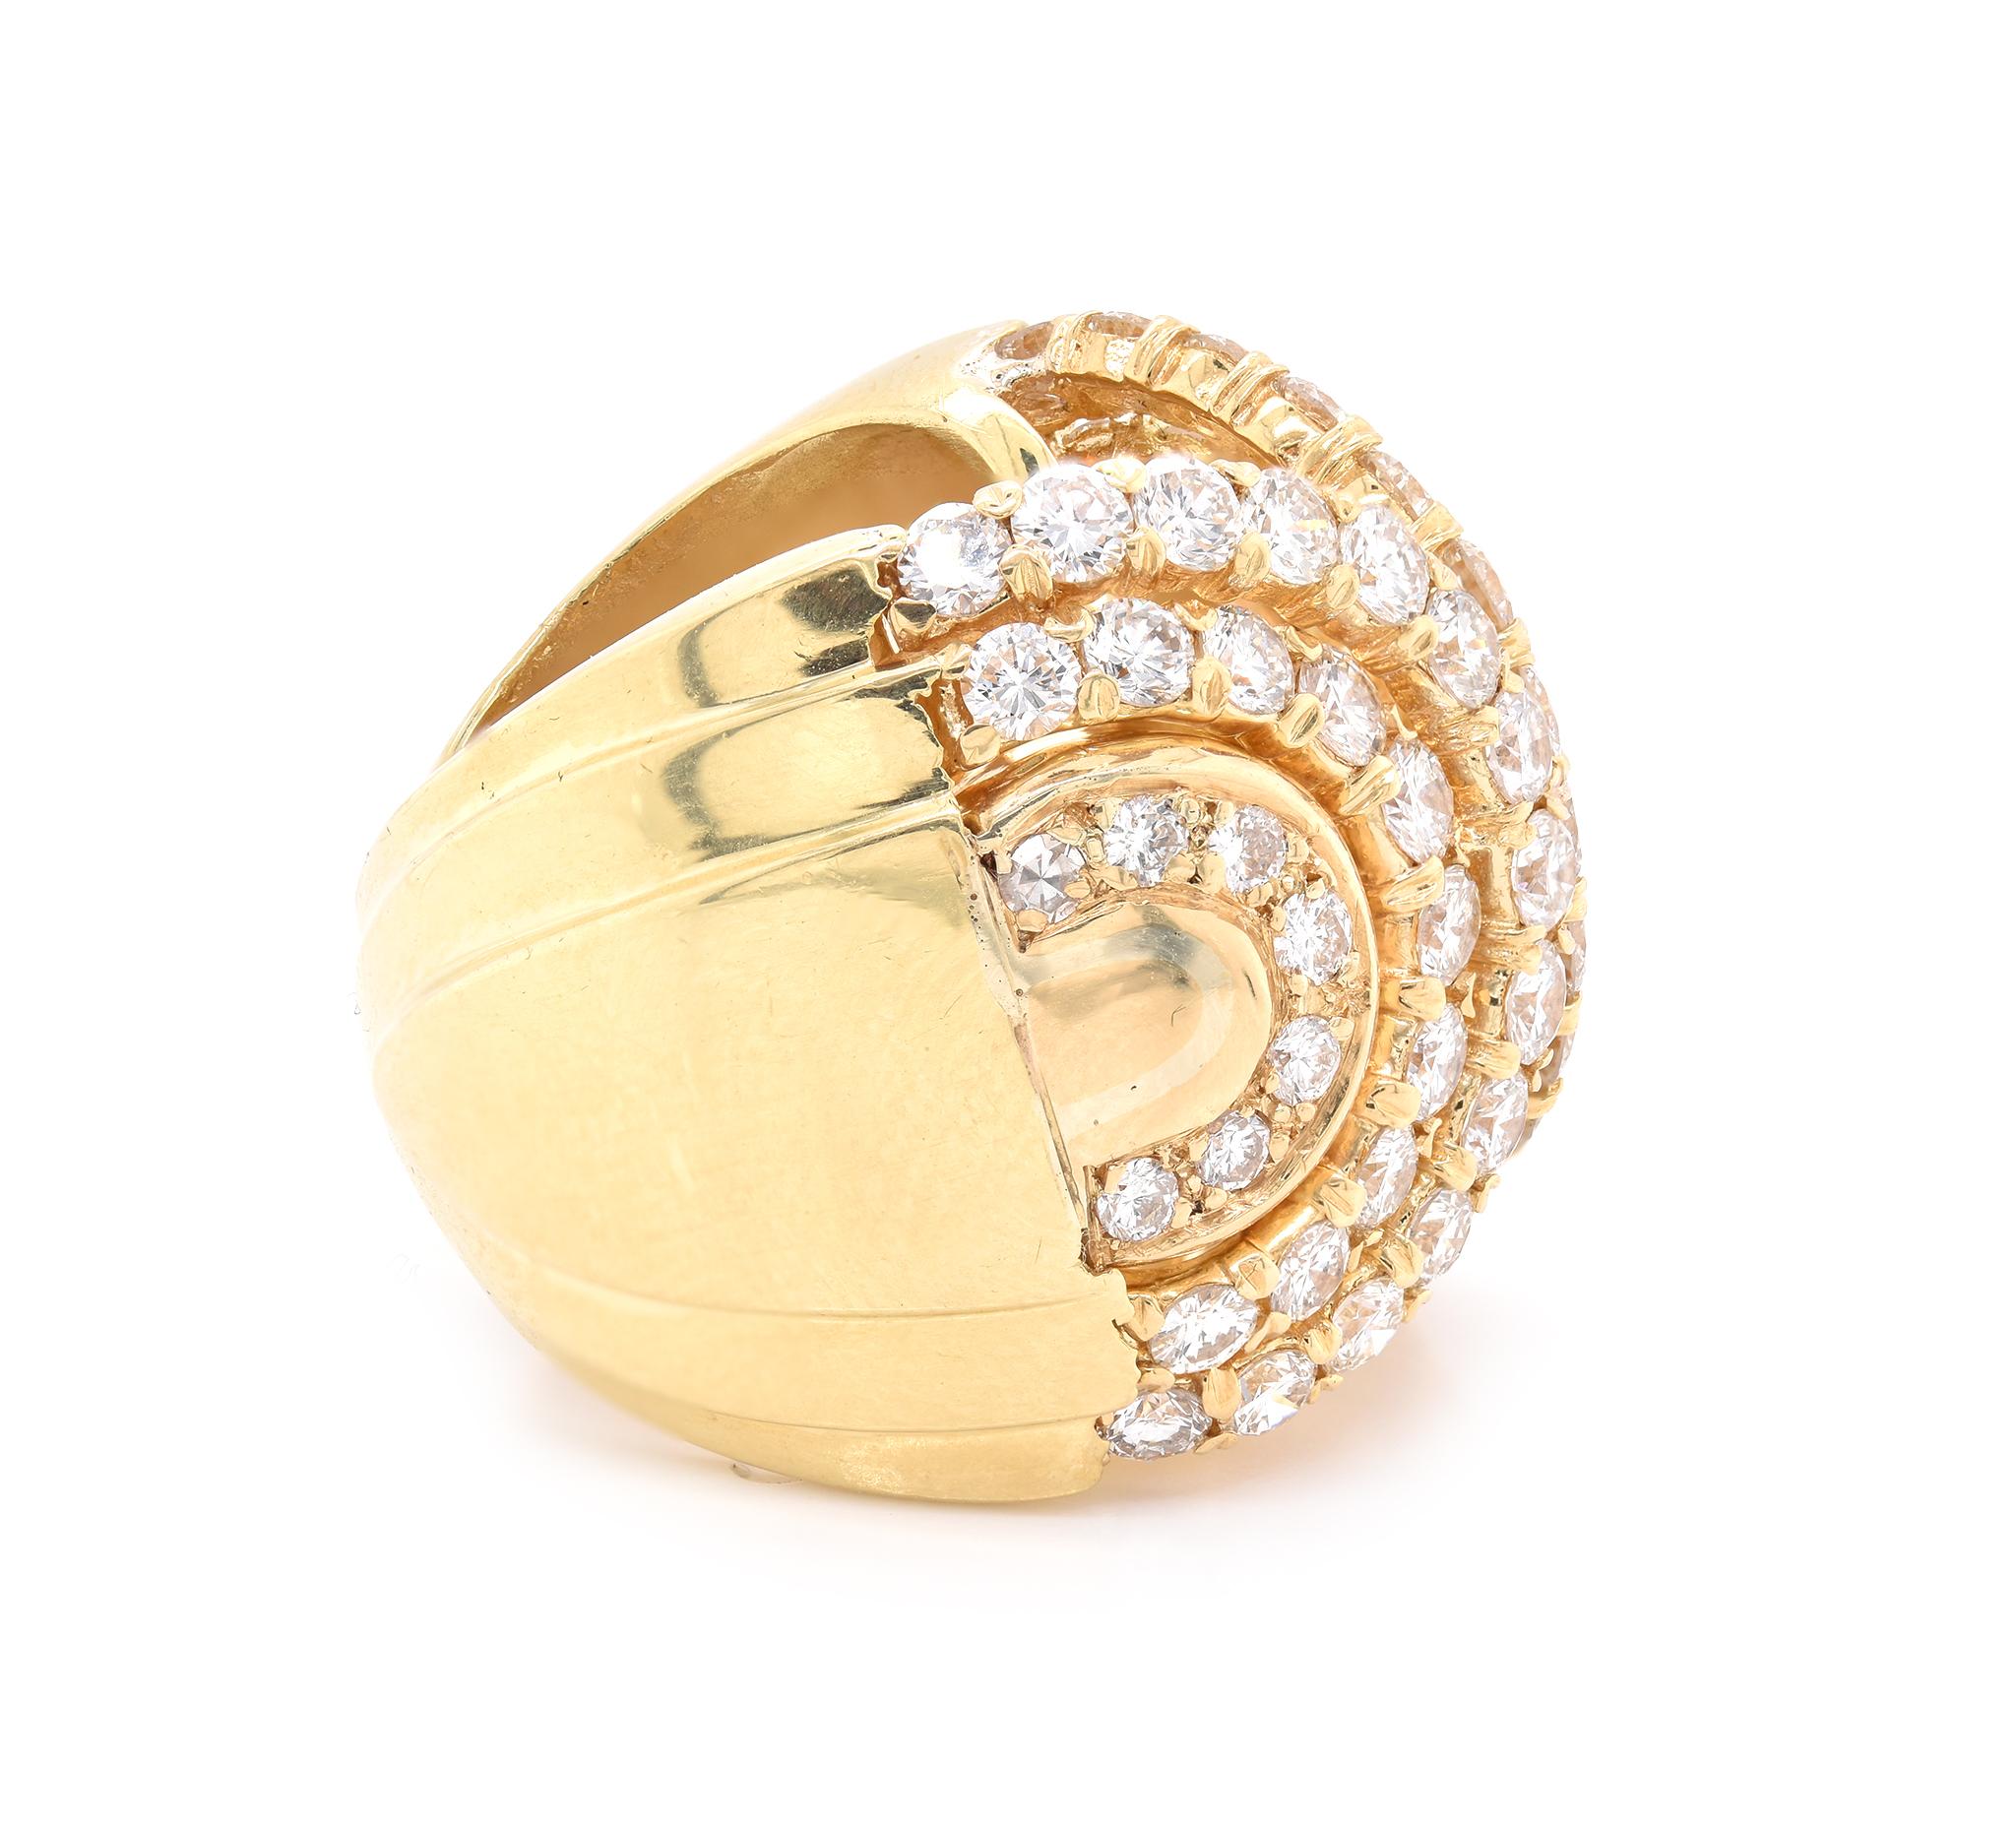 Designer: custom
Material: 18K yellow gold
Diamond: 62 round brilliant cut = 4.14cttw
Color: G
Clarity: VS2
Ring size: 5.25 (please allow two additional shipping days for sizing requests)
Weight:  32.04 grams
